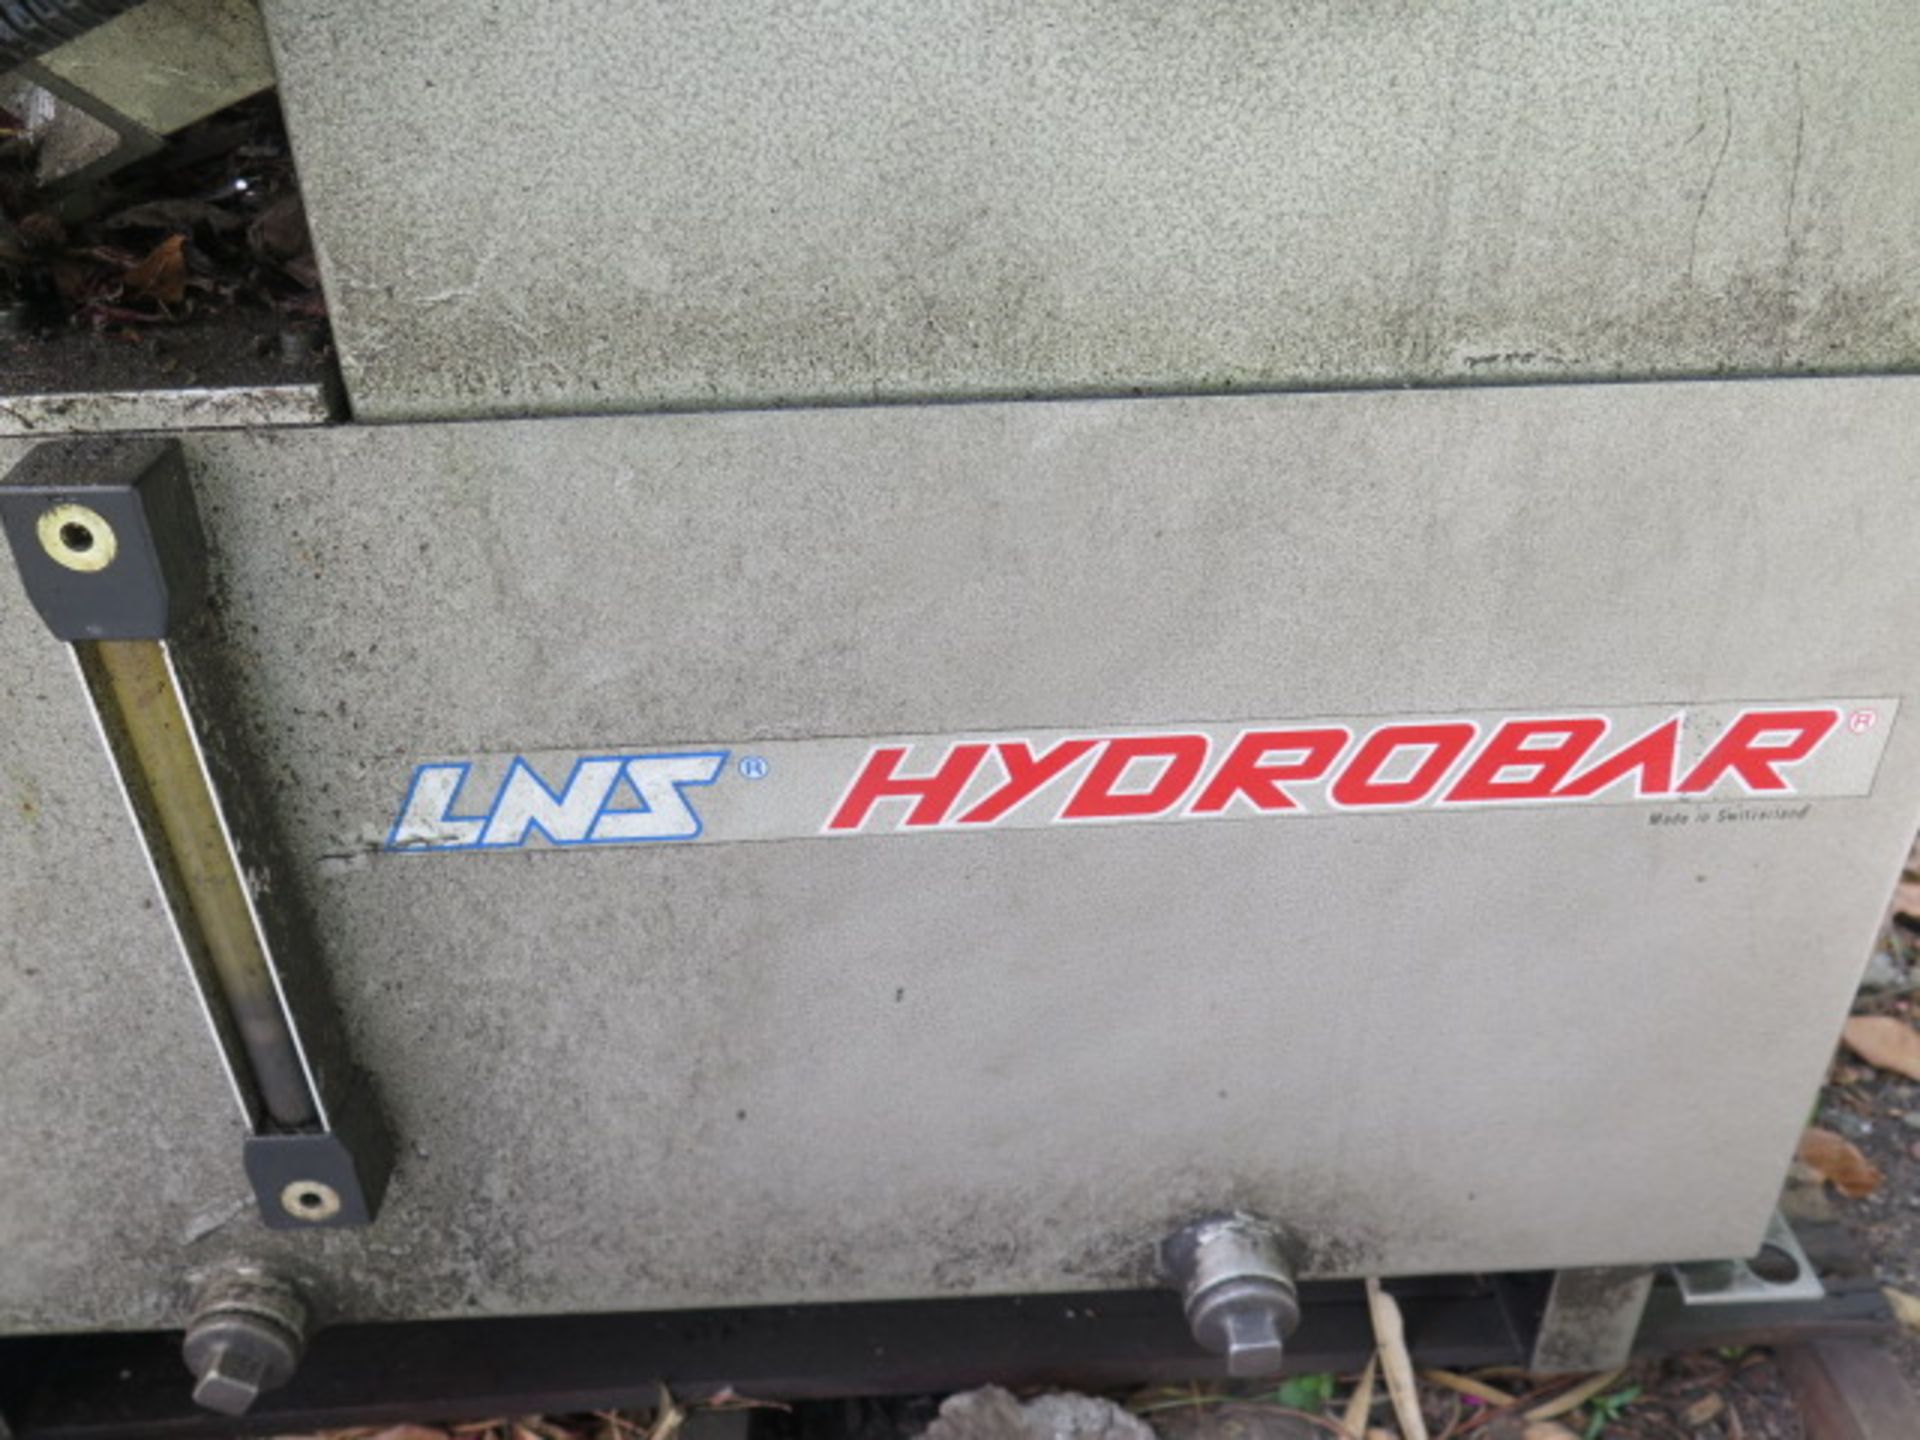 LNS Hydrobar Hydraulic Bar Feed (SOLD AS-IS - NO WARRANTY) (Located at 2091 Fortune Dr., San Jose) - Image 8 of 8